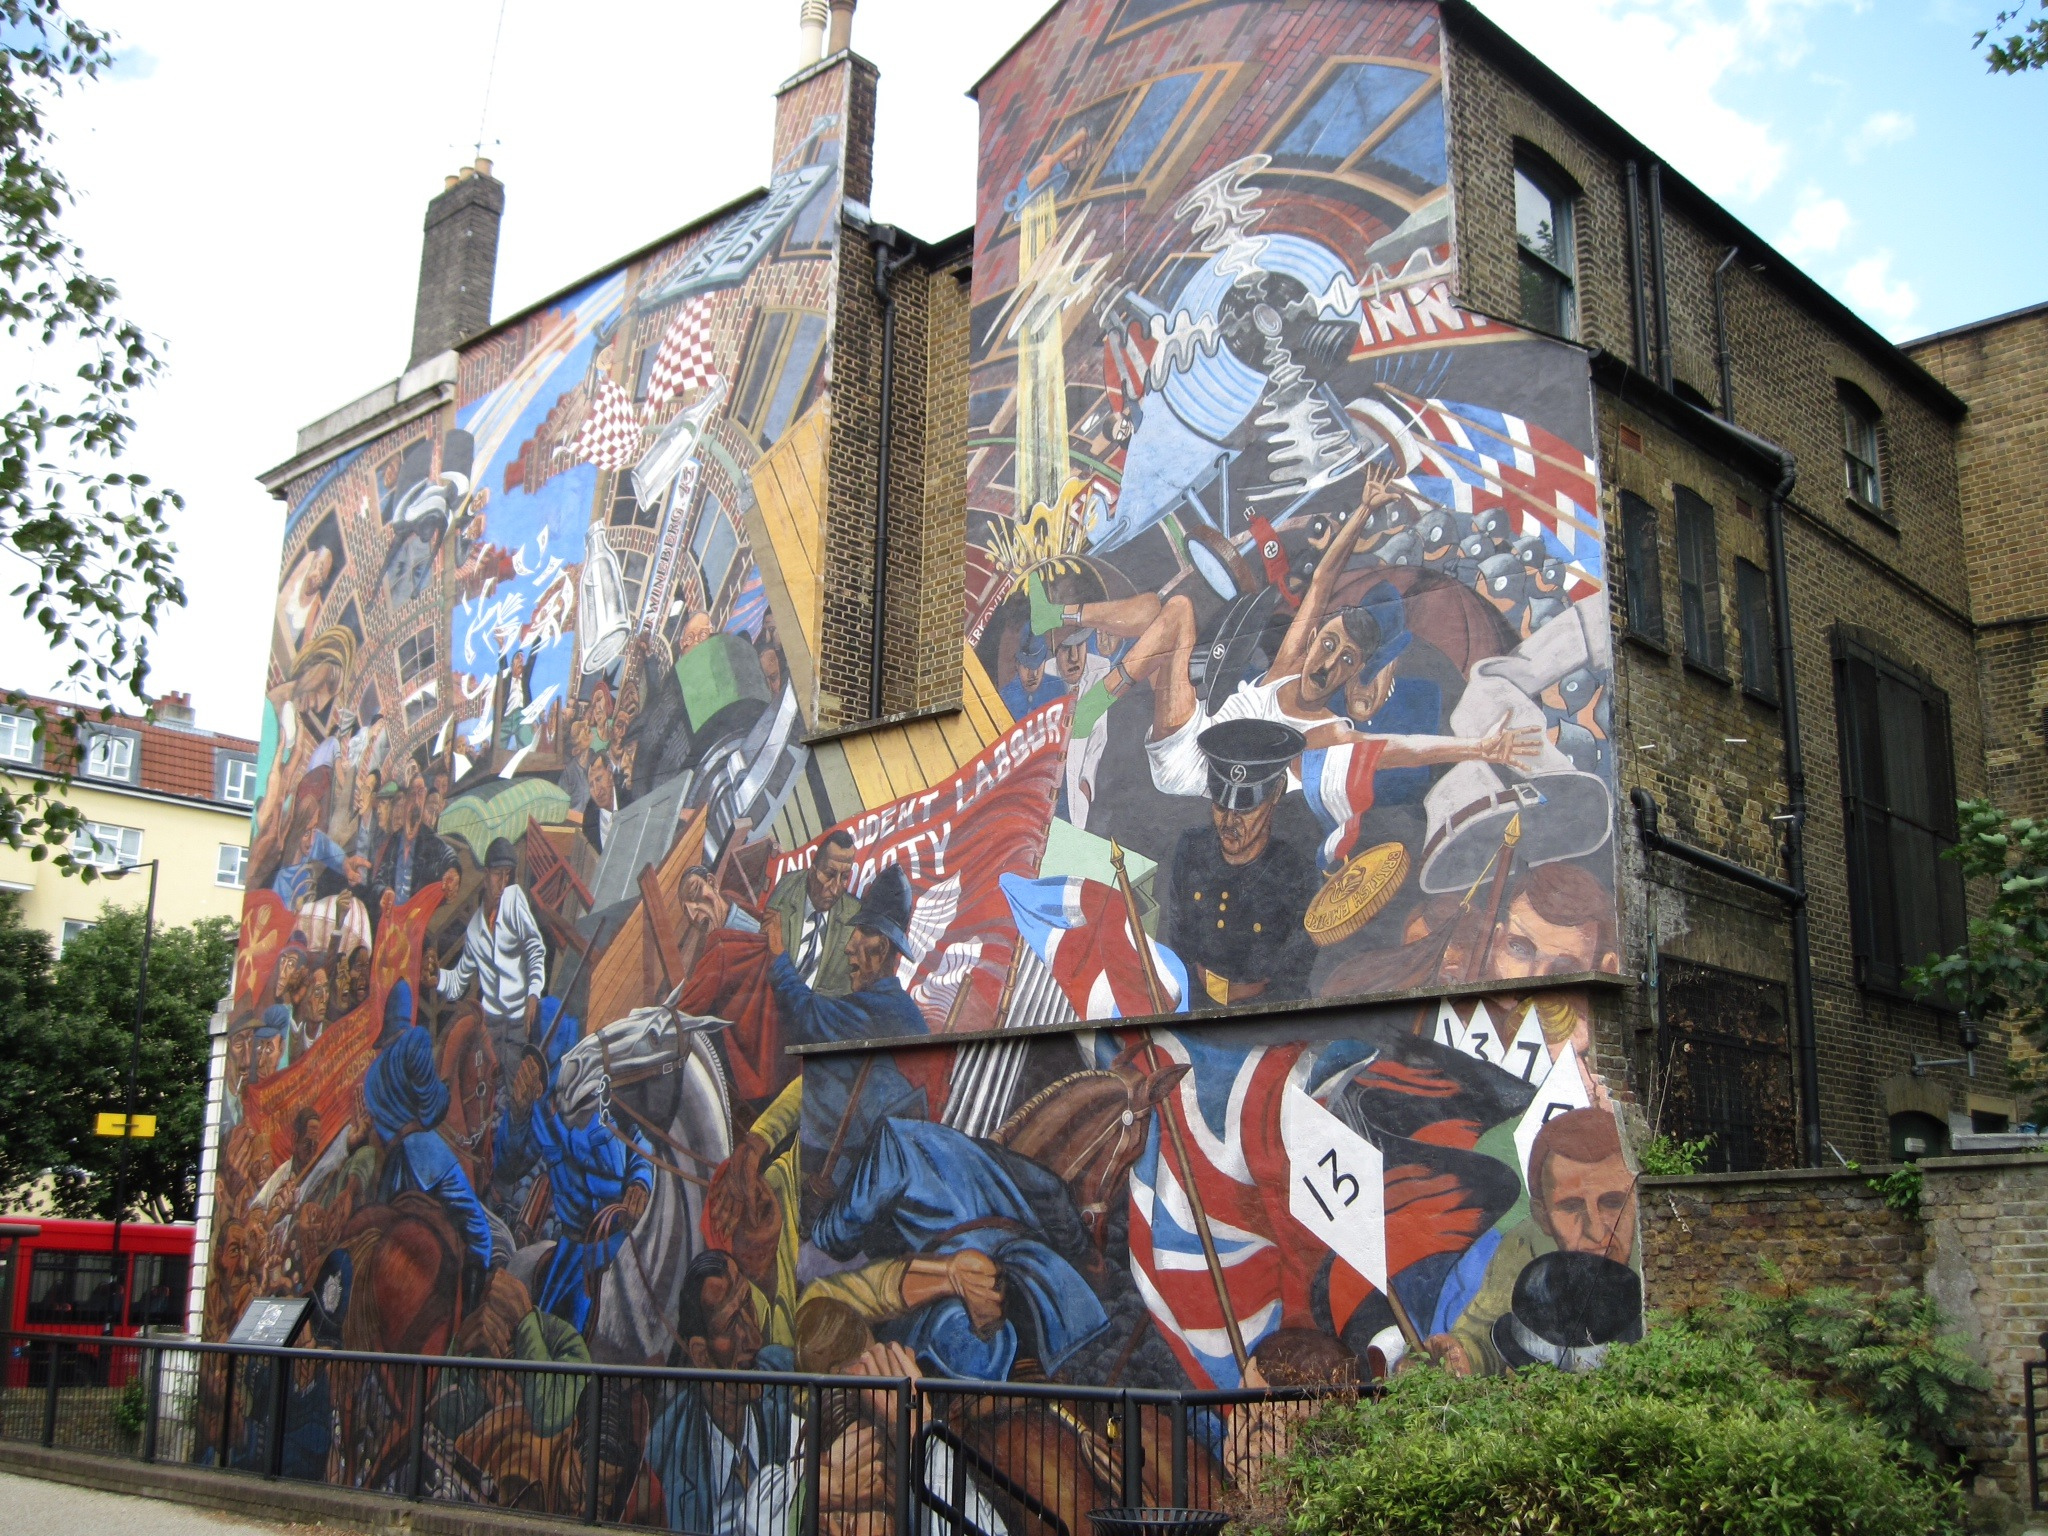 Image of the Cable Street Mural, East London. It commemorates the Battle of Cable Street which took place on Sunday 4 October 1936.